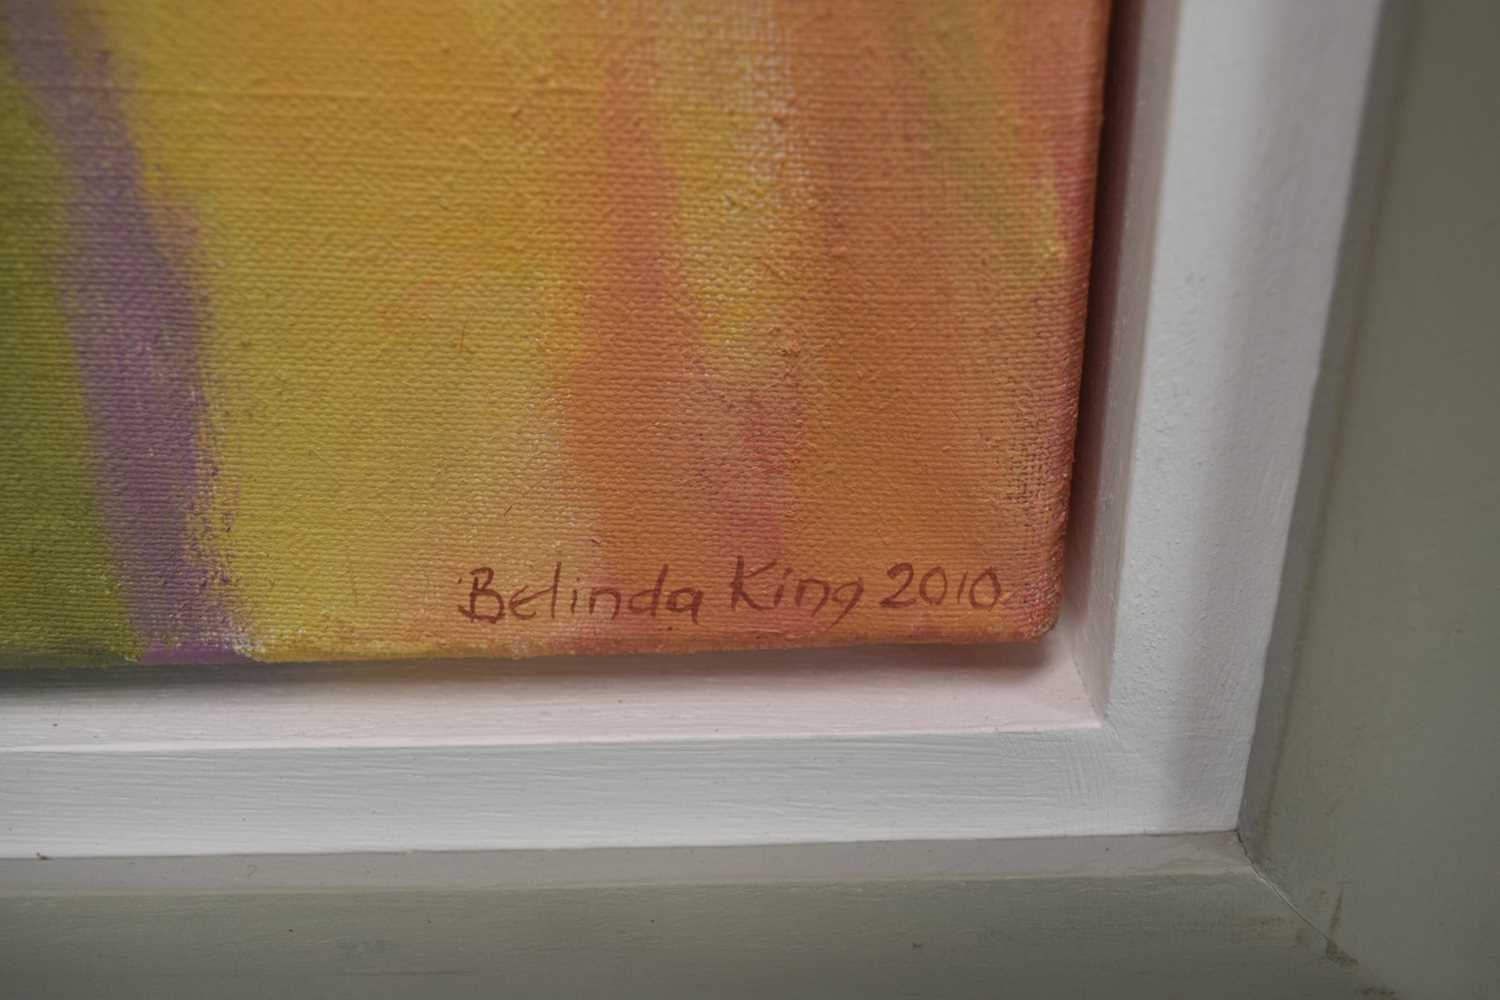 Belinda King (Contemporary) oil on canvas - Assington Field Edge, signed and dated 2010, label verso - Image 3 of 6